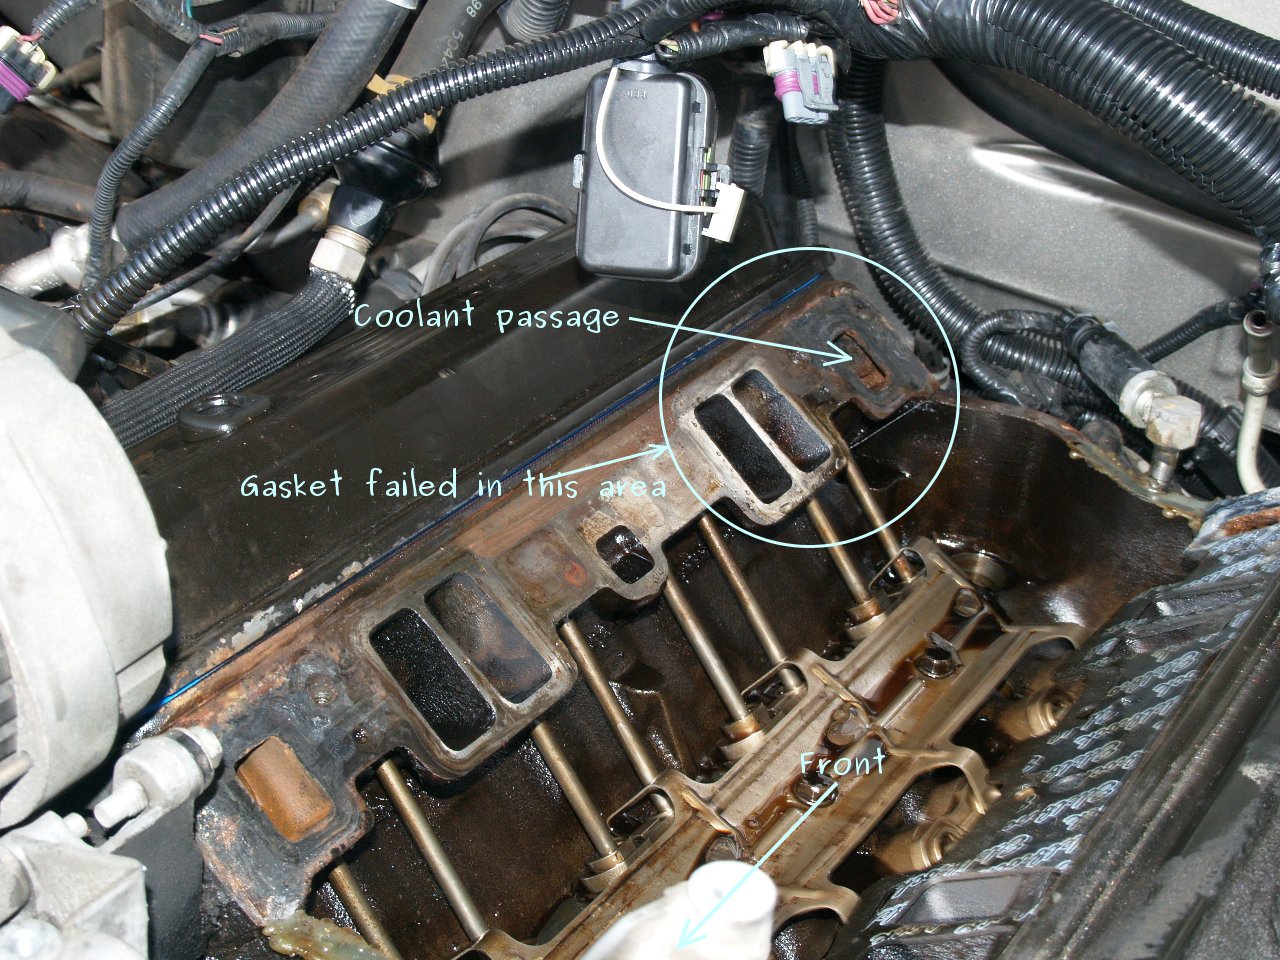 See P2930 in engine